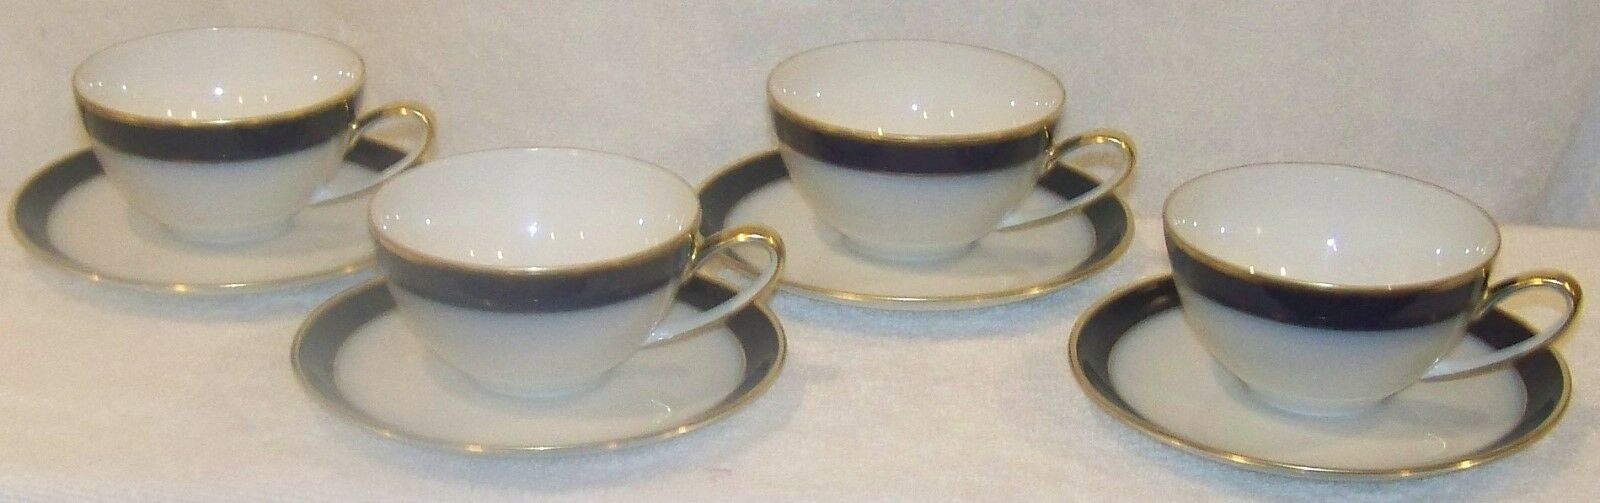 HUTSCHENREUTHER CHINA WHITE/COBALT FOUR COFFEE CUPS & SAUCERS